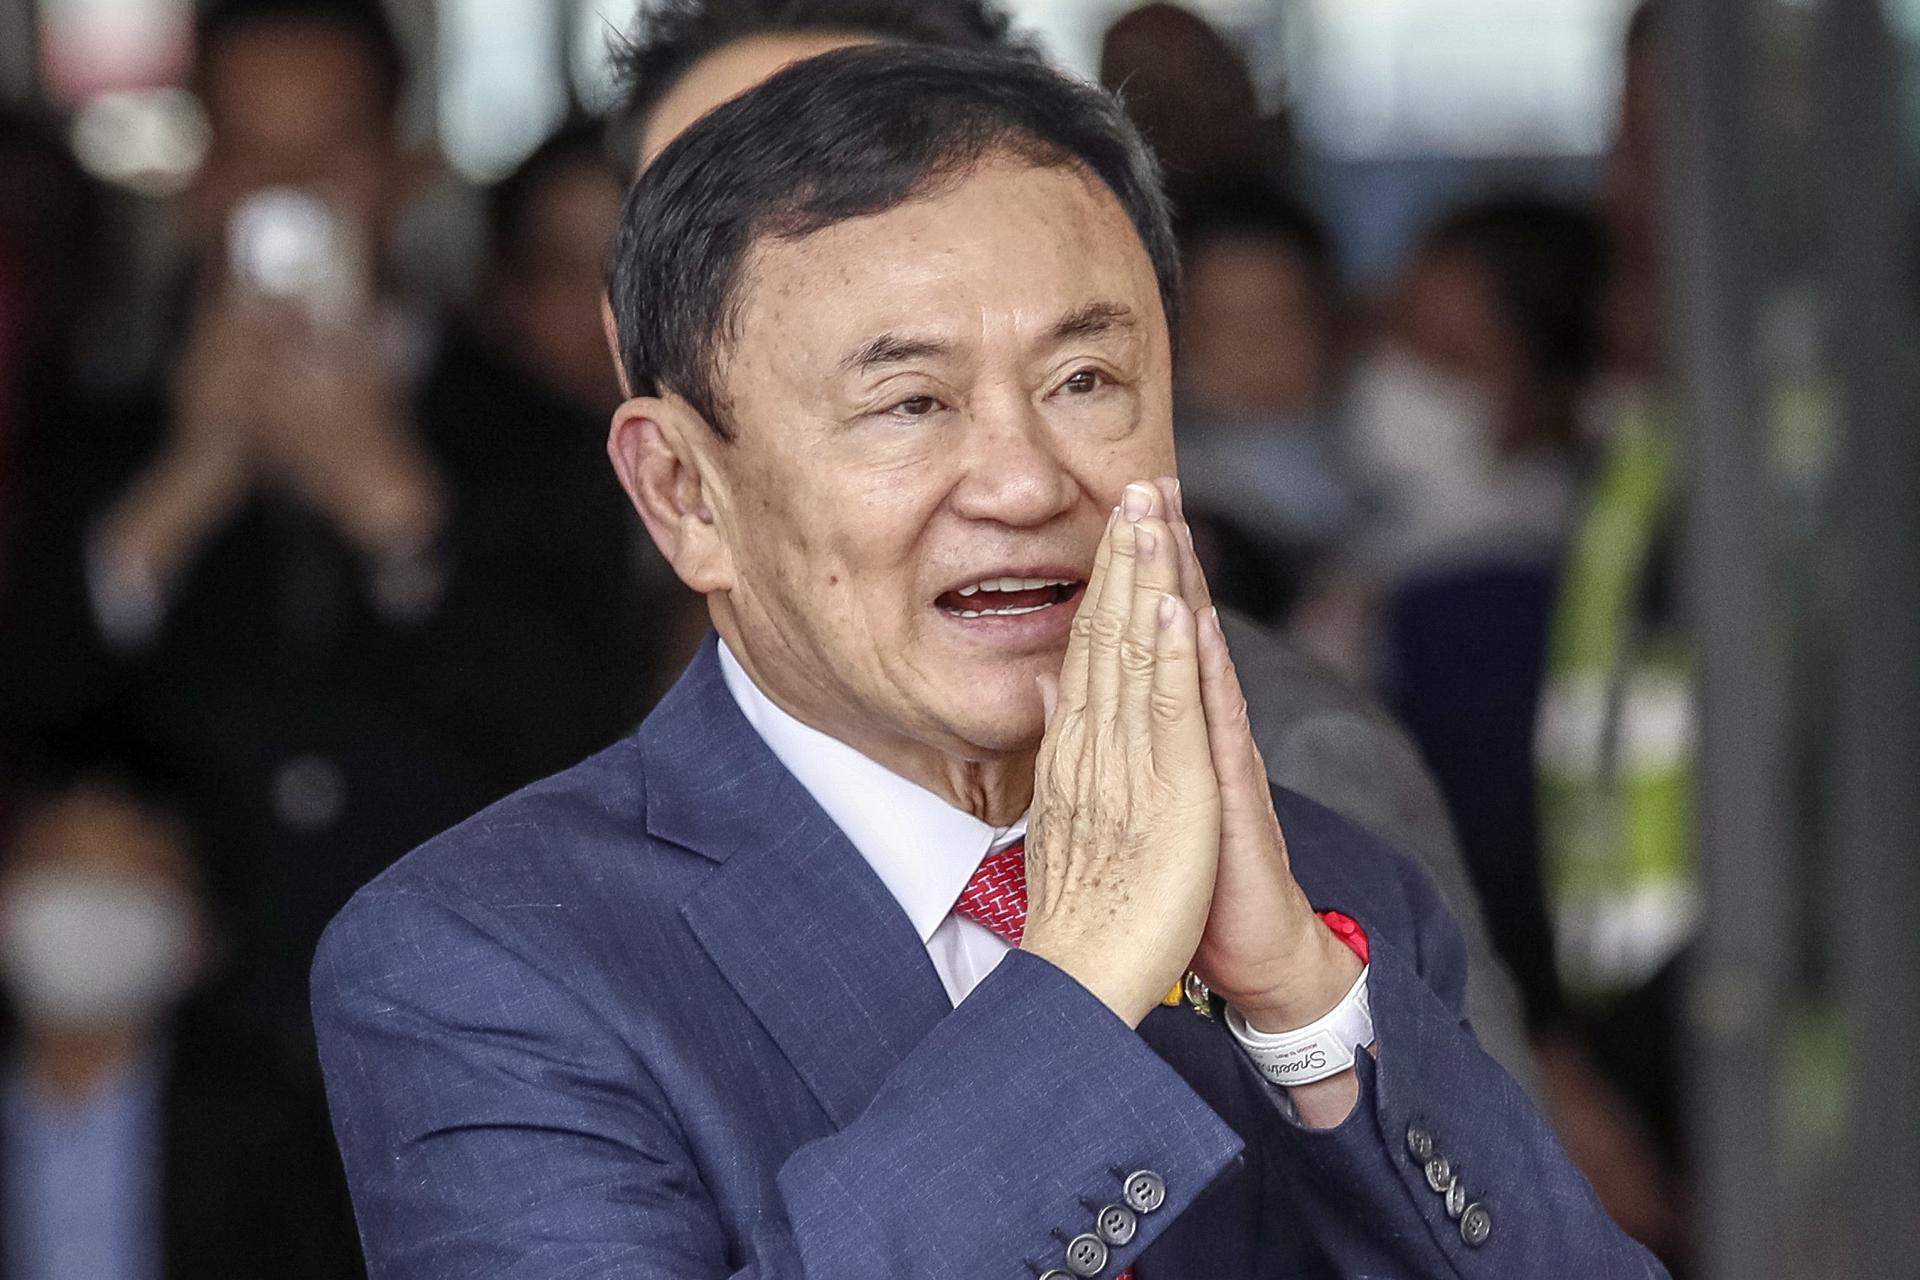 Former Thai prime minister Thaksin Shinawatra greets supporters and journalists upon his arrival at Don Mueang airport in Bangkok, Thailand, 22 August 2023. EFE-EPA/RUNGROJ YONGRIT